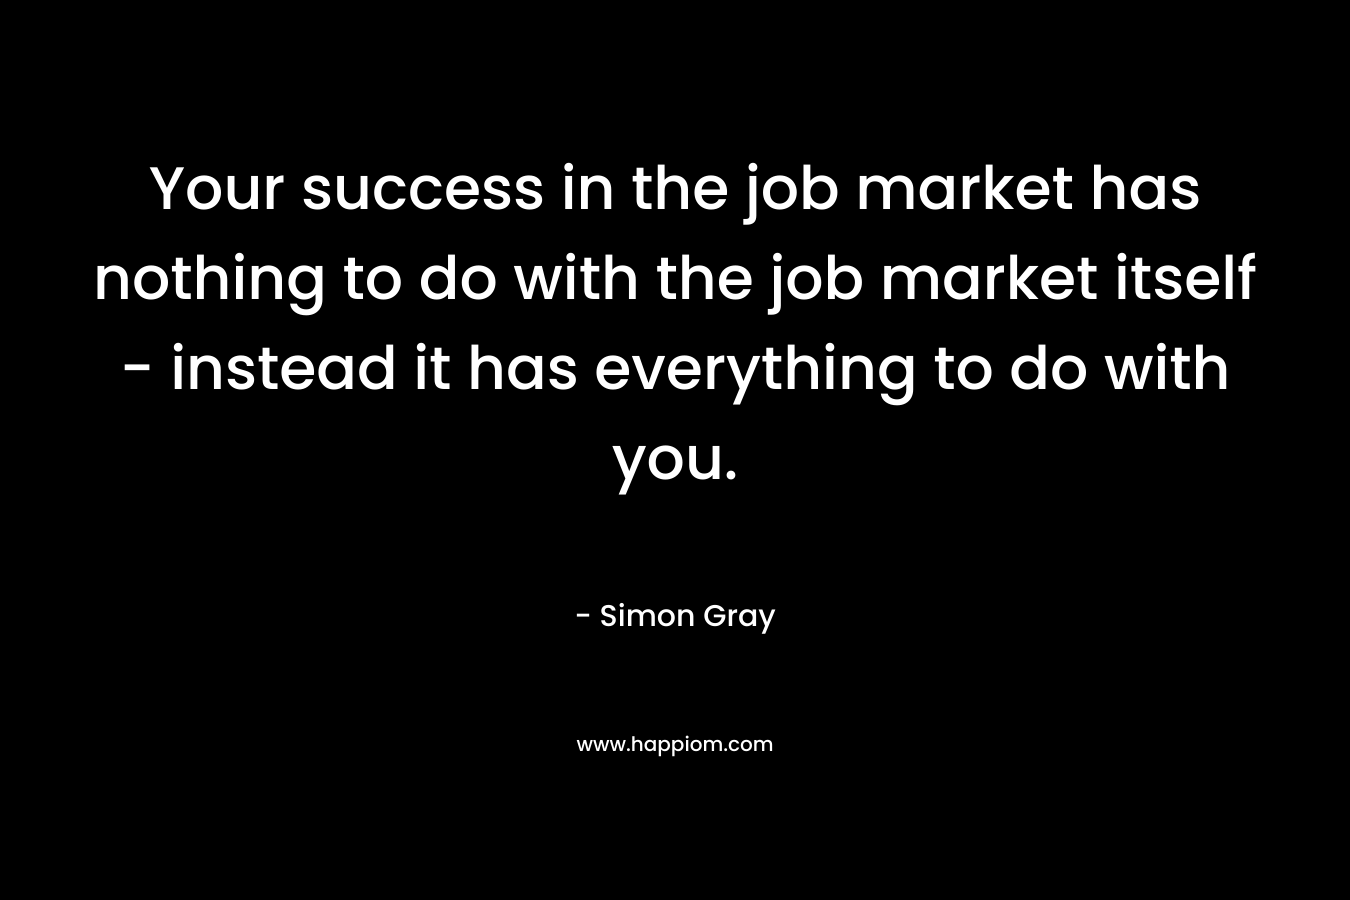 Your success in the job market has nothing to do with the job market itself - instead it has everything to do with you.